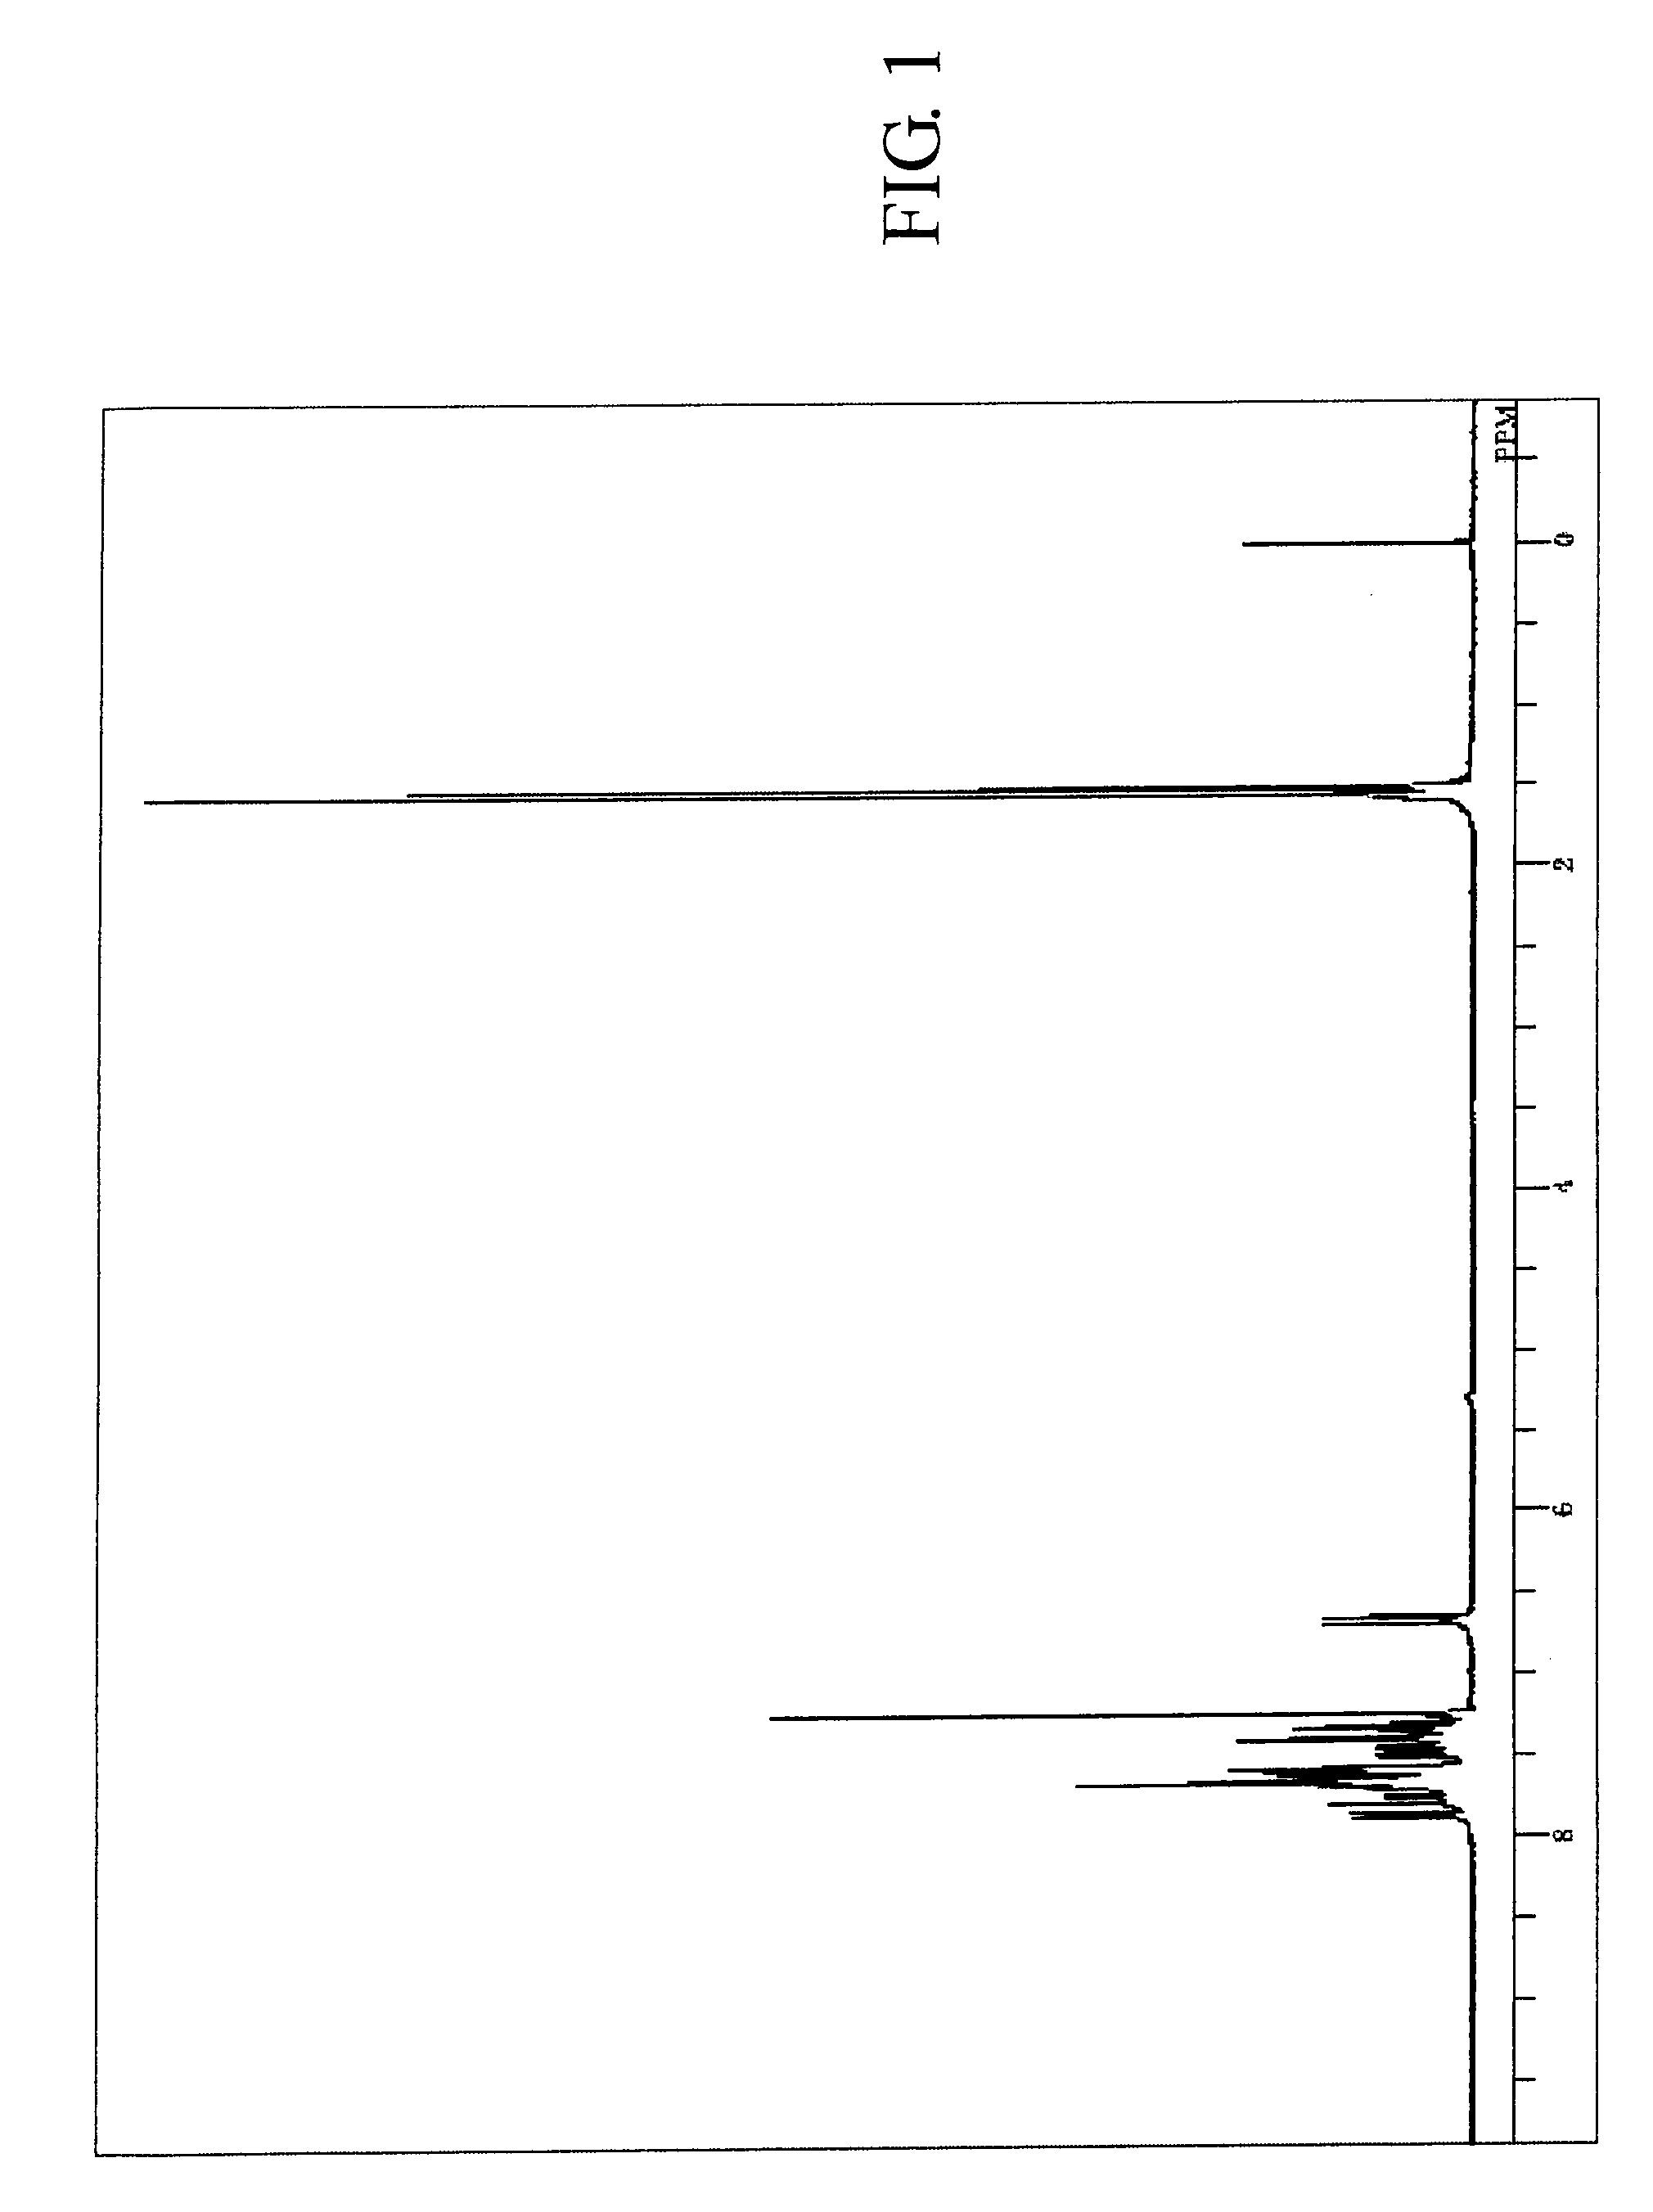 Fluoranthene compound, organic electroluminescence device using the same, and solution containing organic electroluminescence material